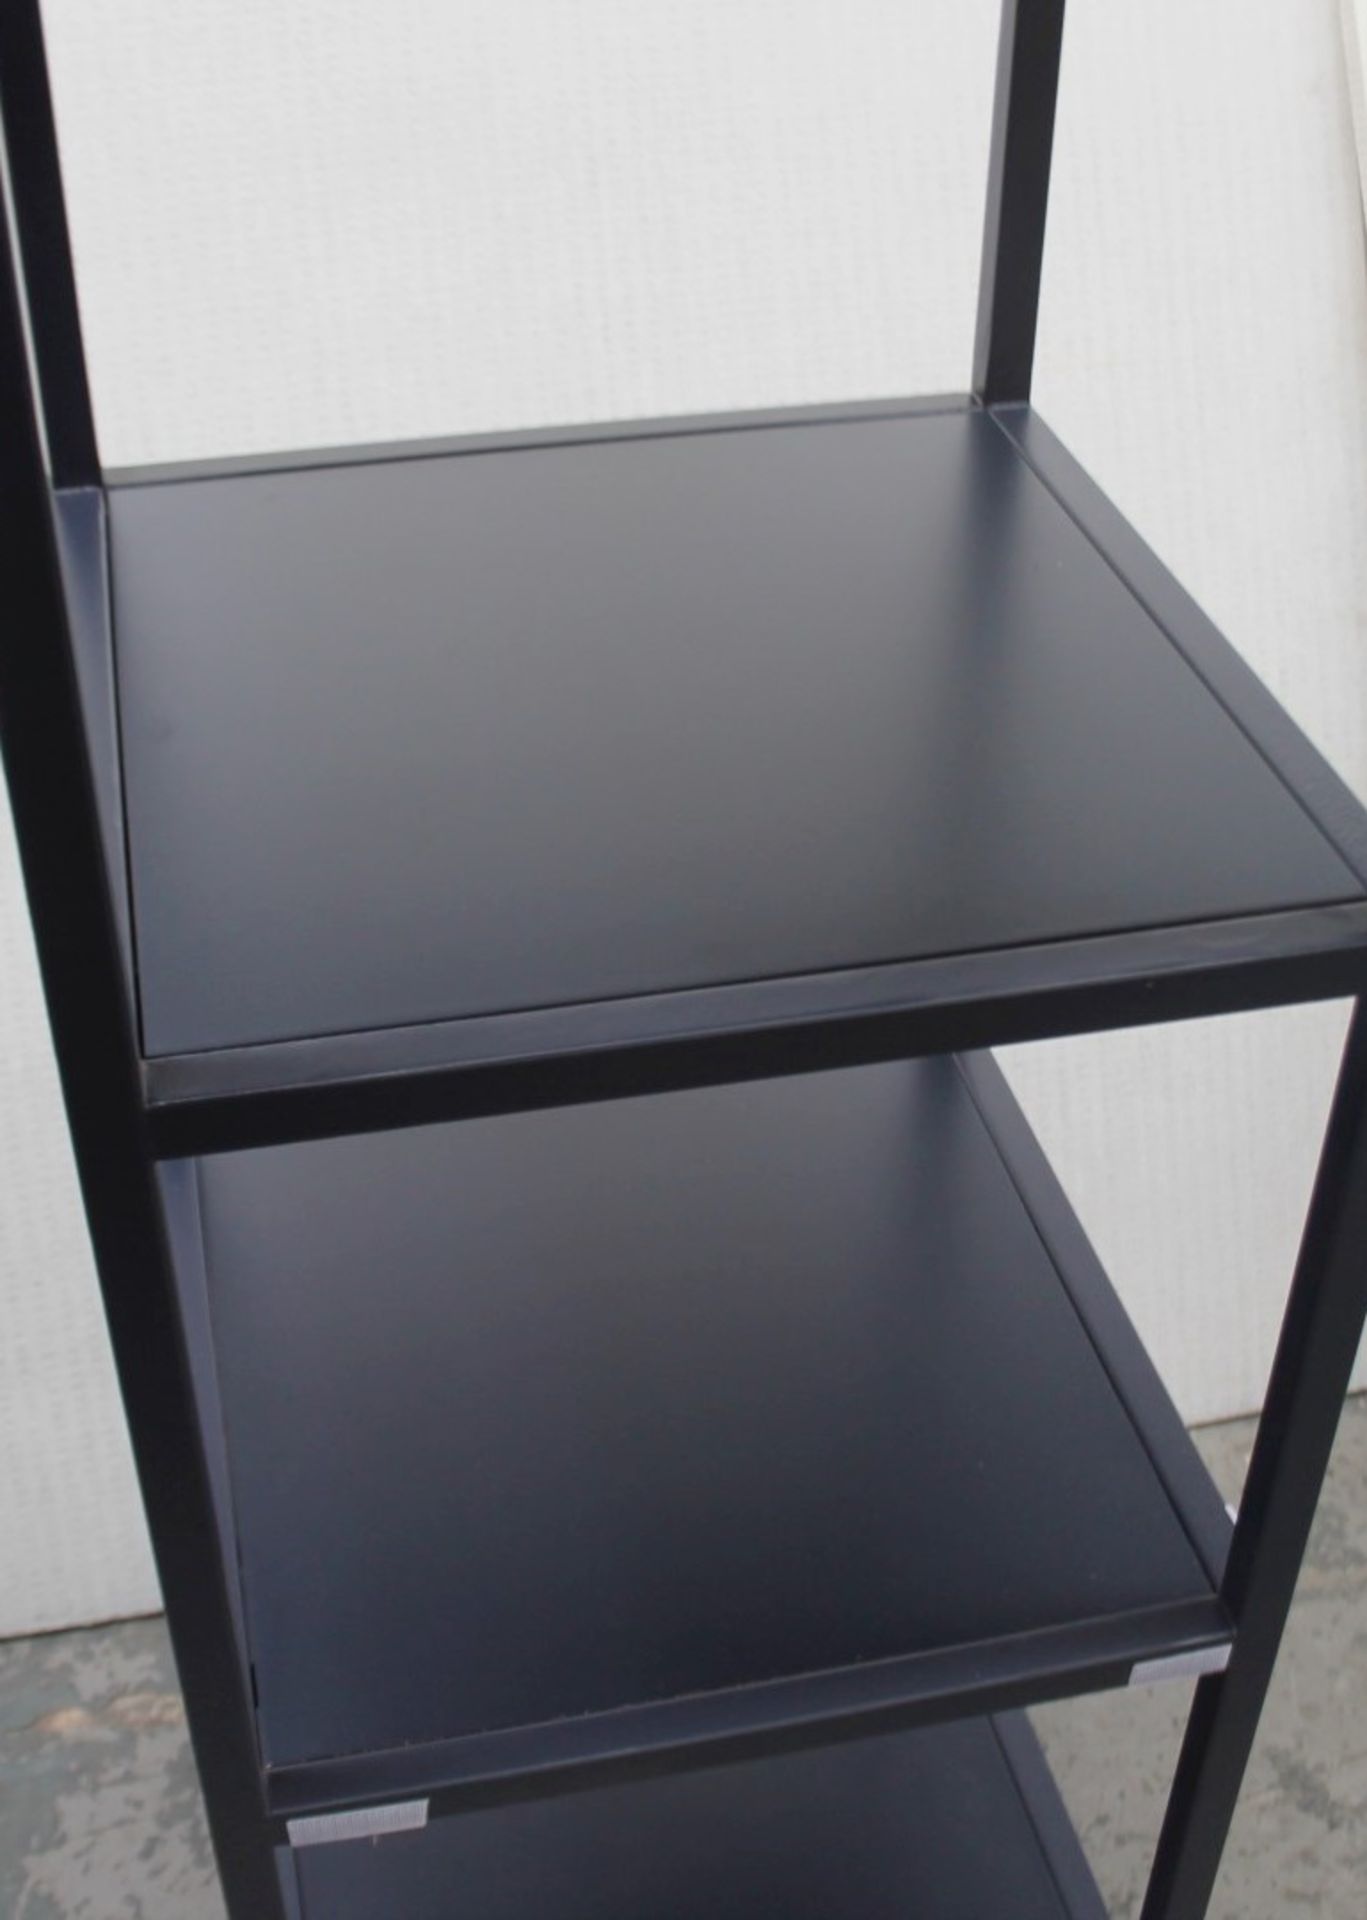 1 x Tall 2.1-Metre Tall 5-Tier Display Unit In Navy Blue Featurnig A Sturdy Metal Frame - Ex-Display - Image 2 of 4